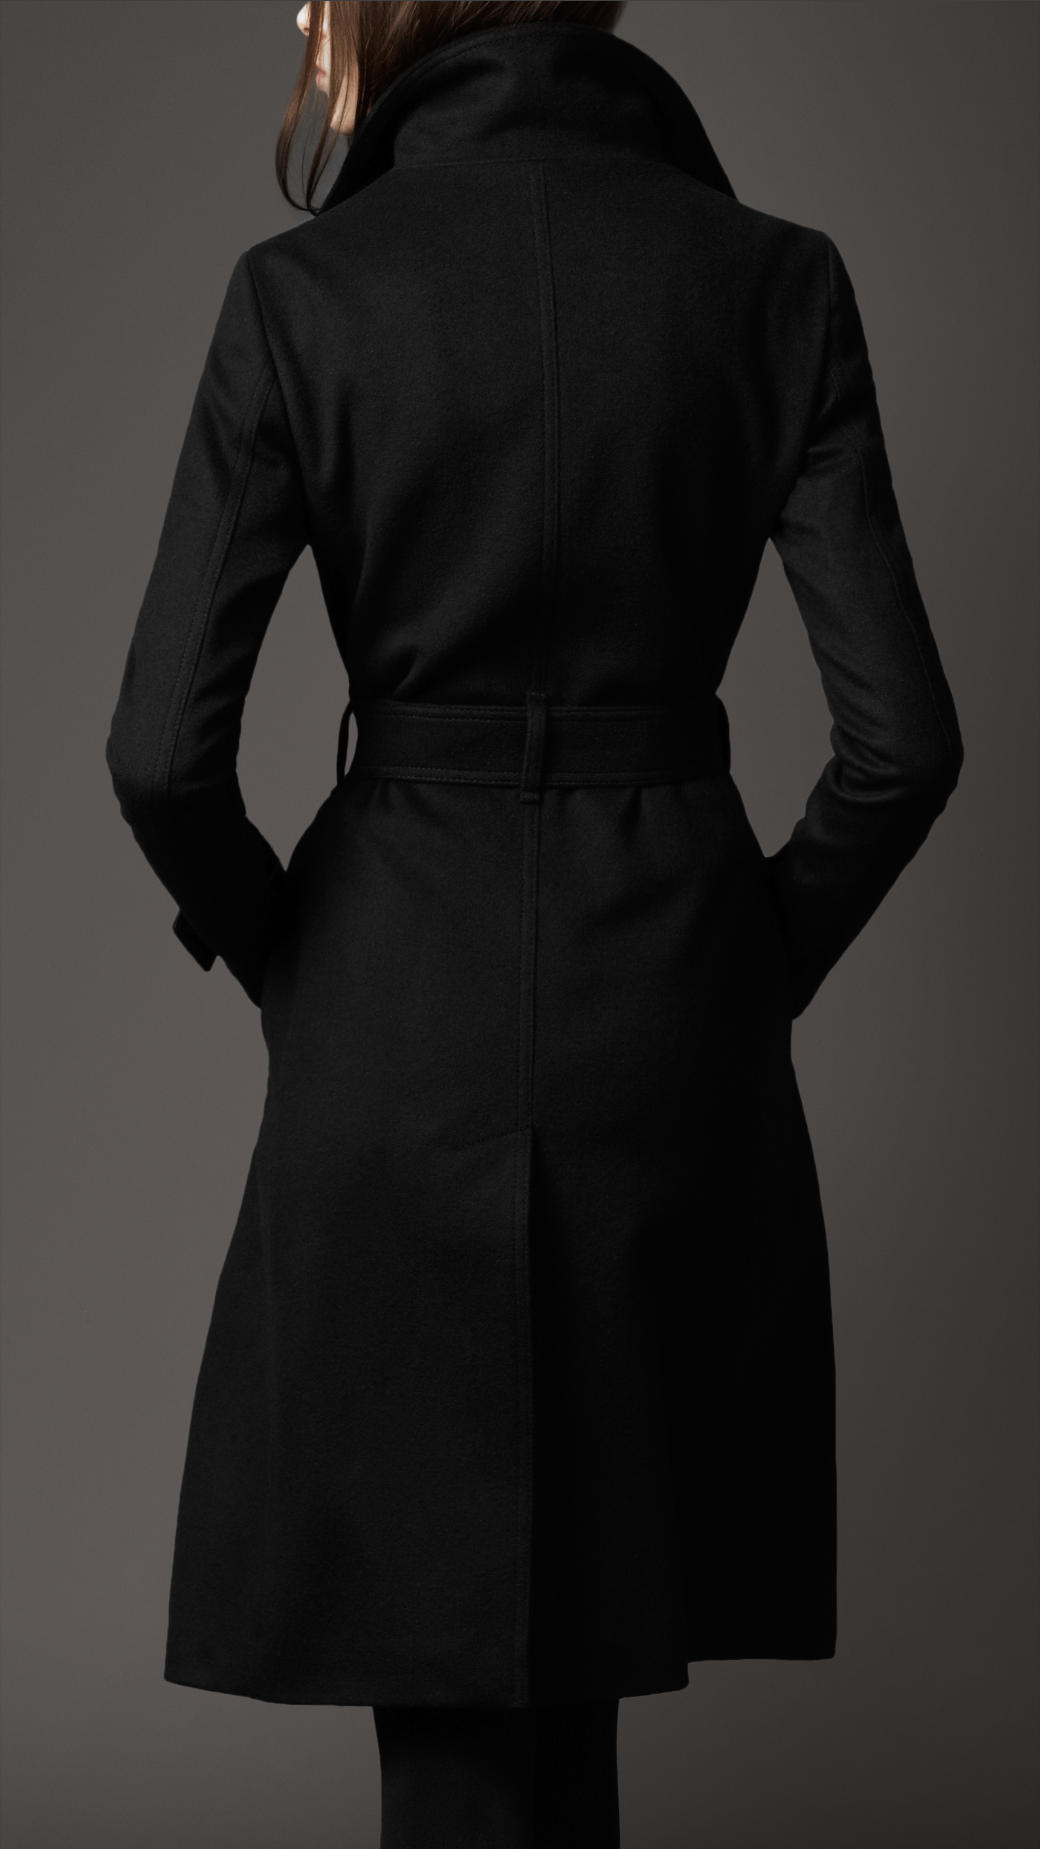 Lyst - Burberry Long Cashmere Blend Coat in Black